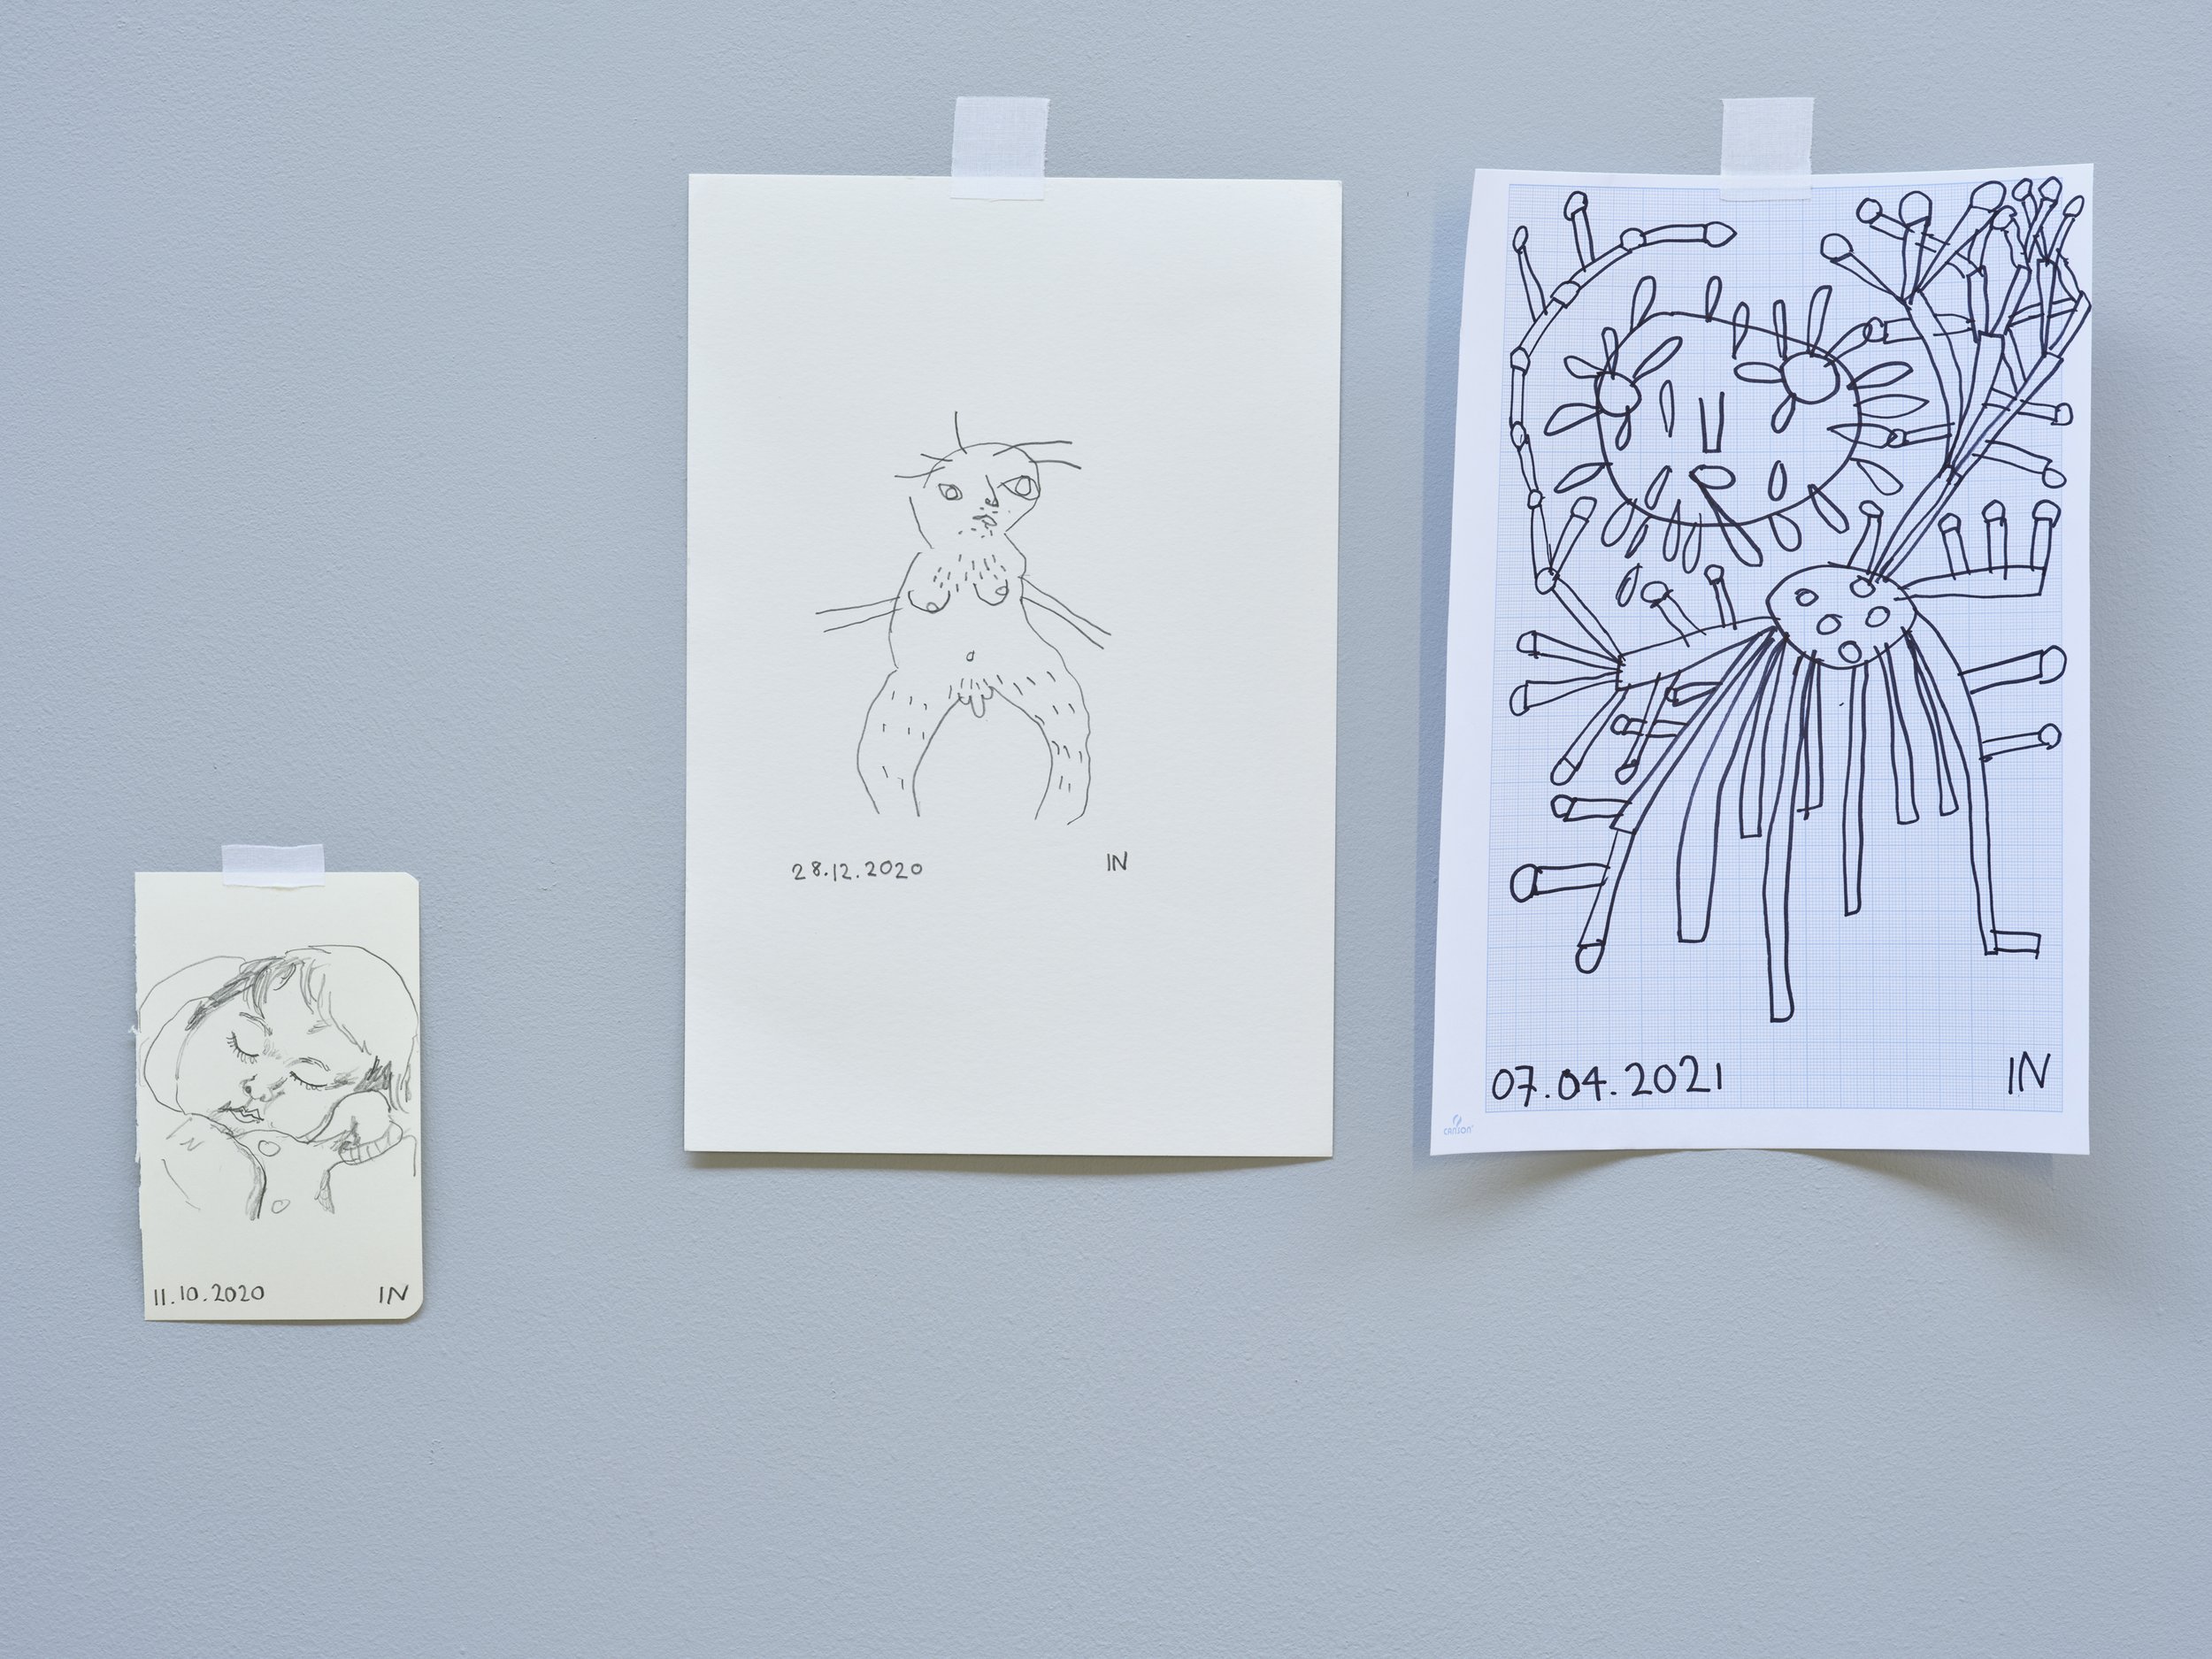  Isobel Neviazsky,  Material is a Friend , 2021, graphite, felt tip, charcoal and pen on paper, installation view. Courtesy: the artists and TULCA Festival of Visual Arts; photograph: Ros Kavanagh 